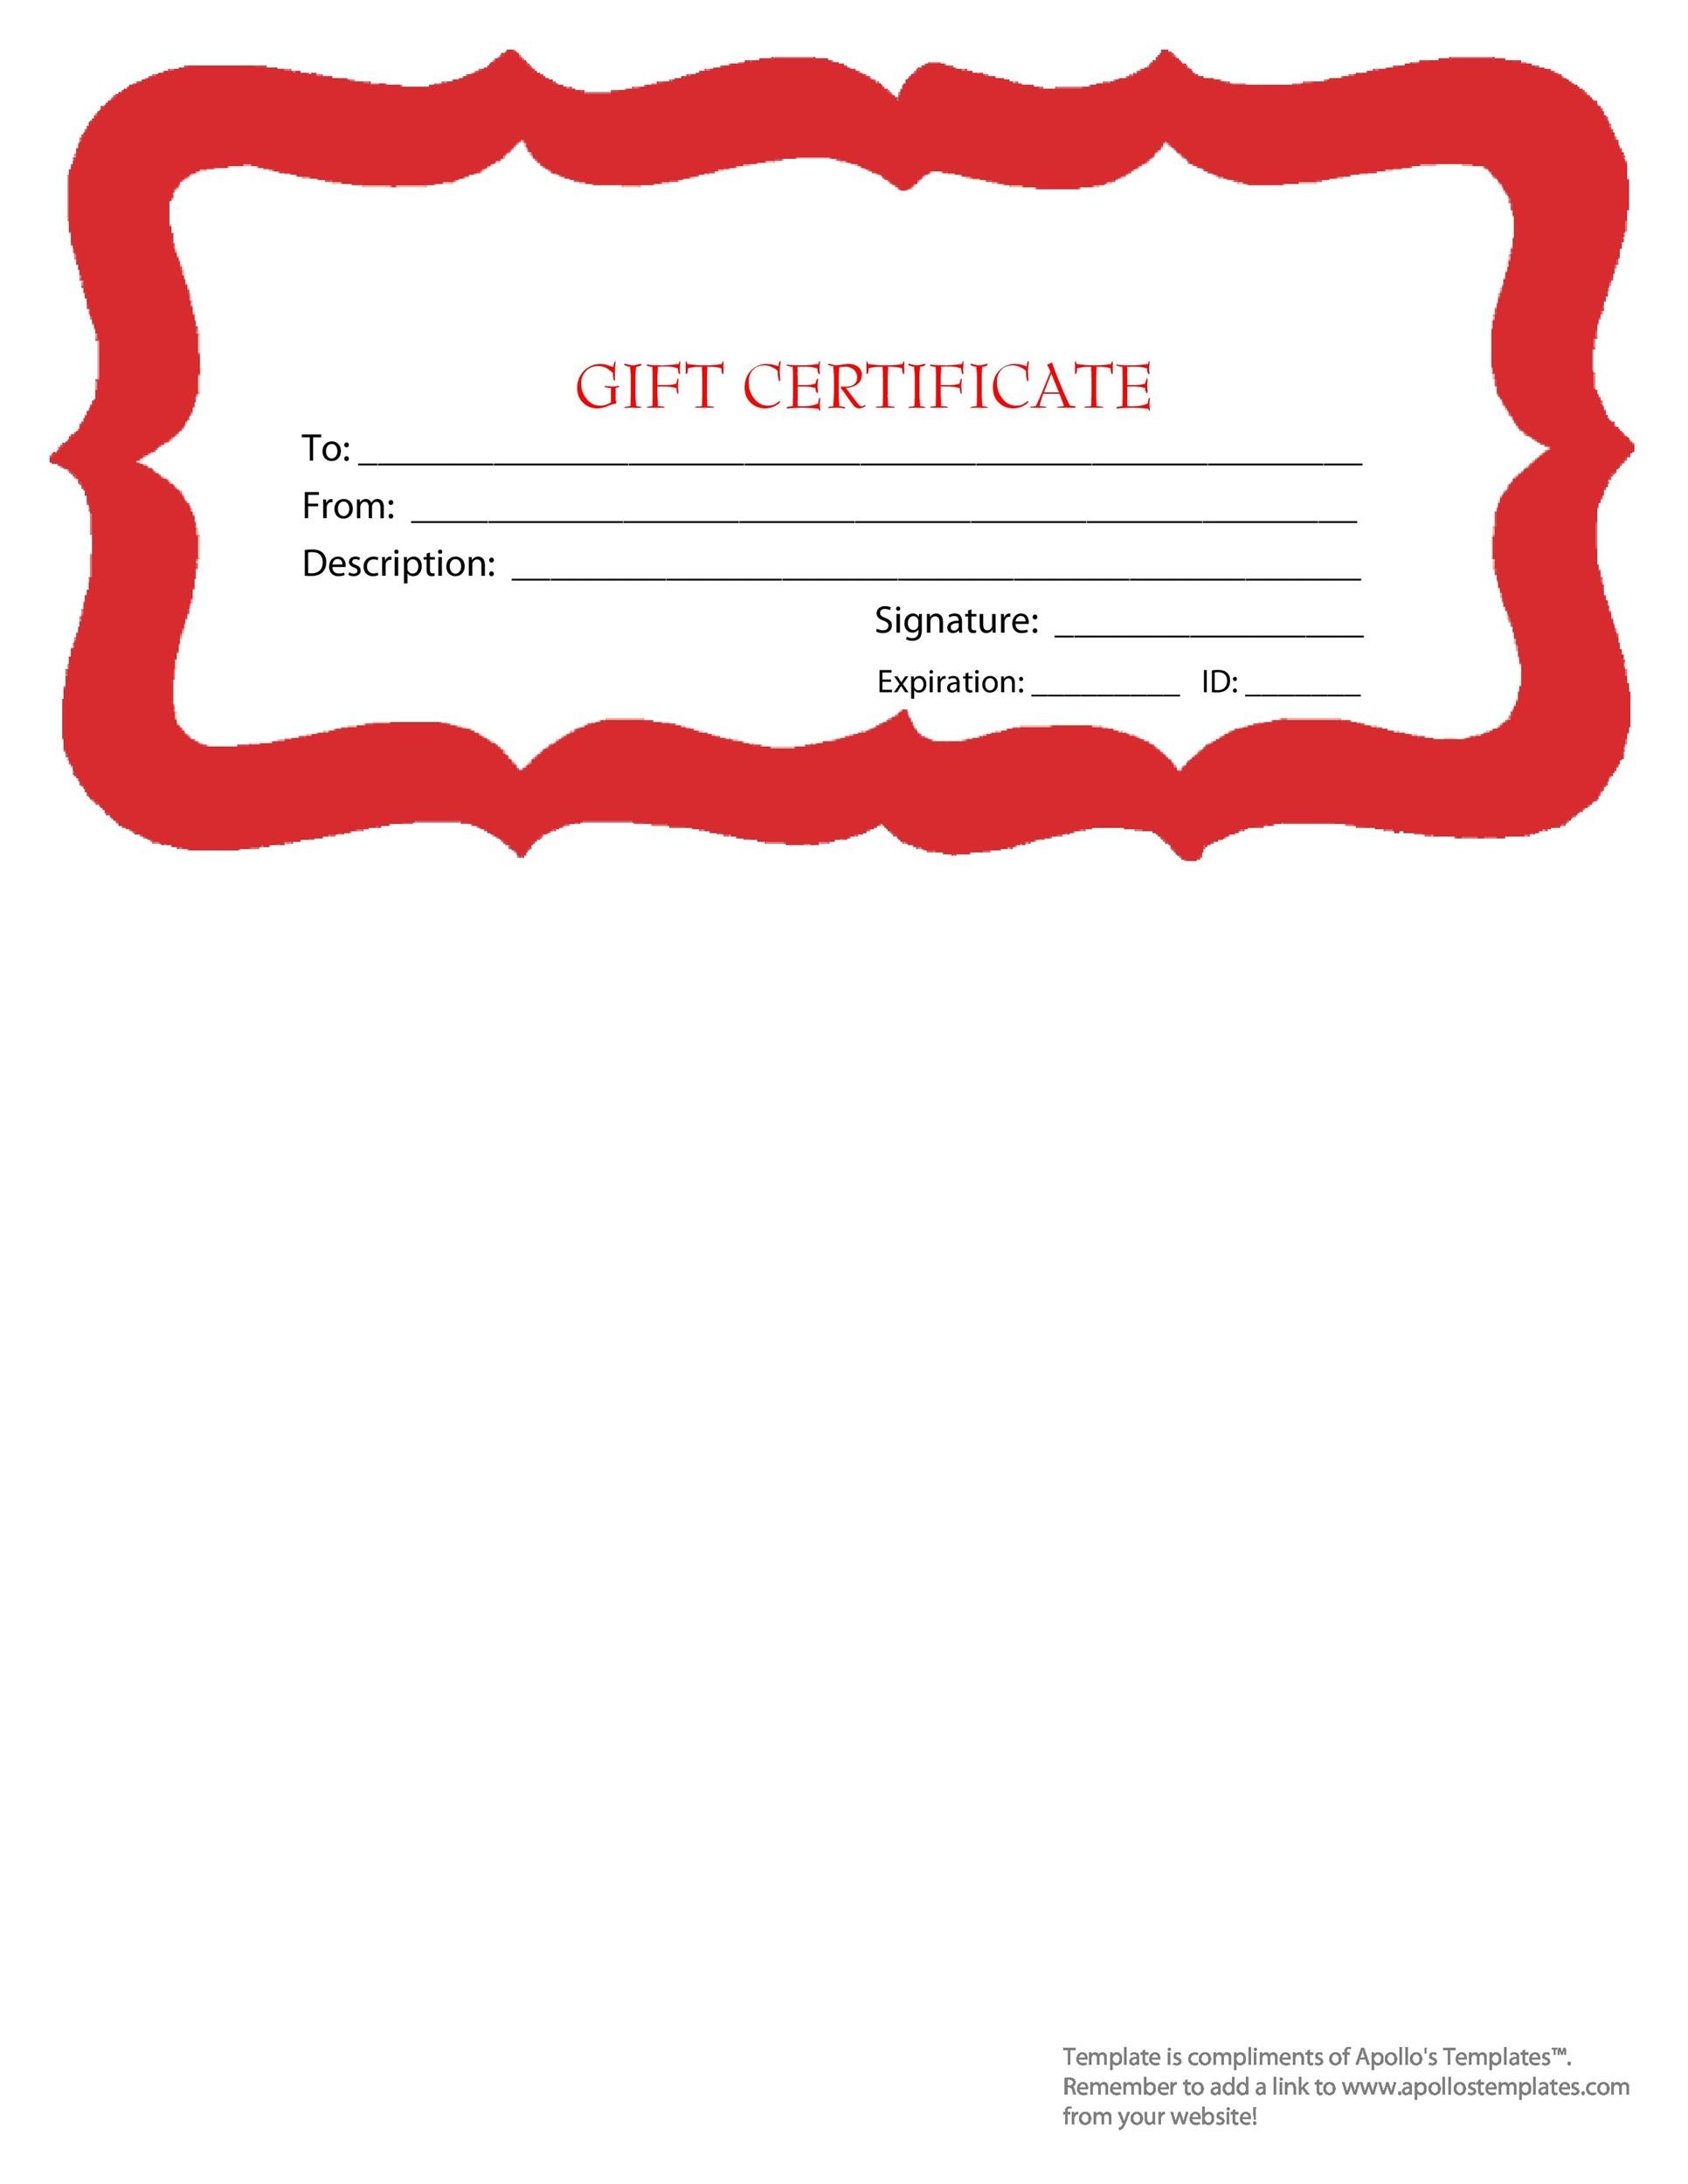 Free Gift Certificate Template 37